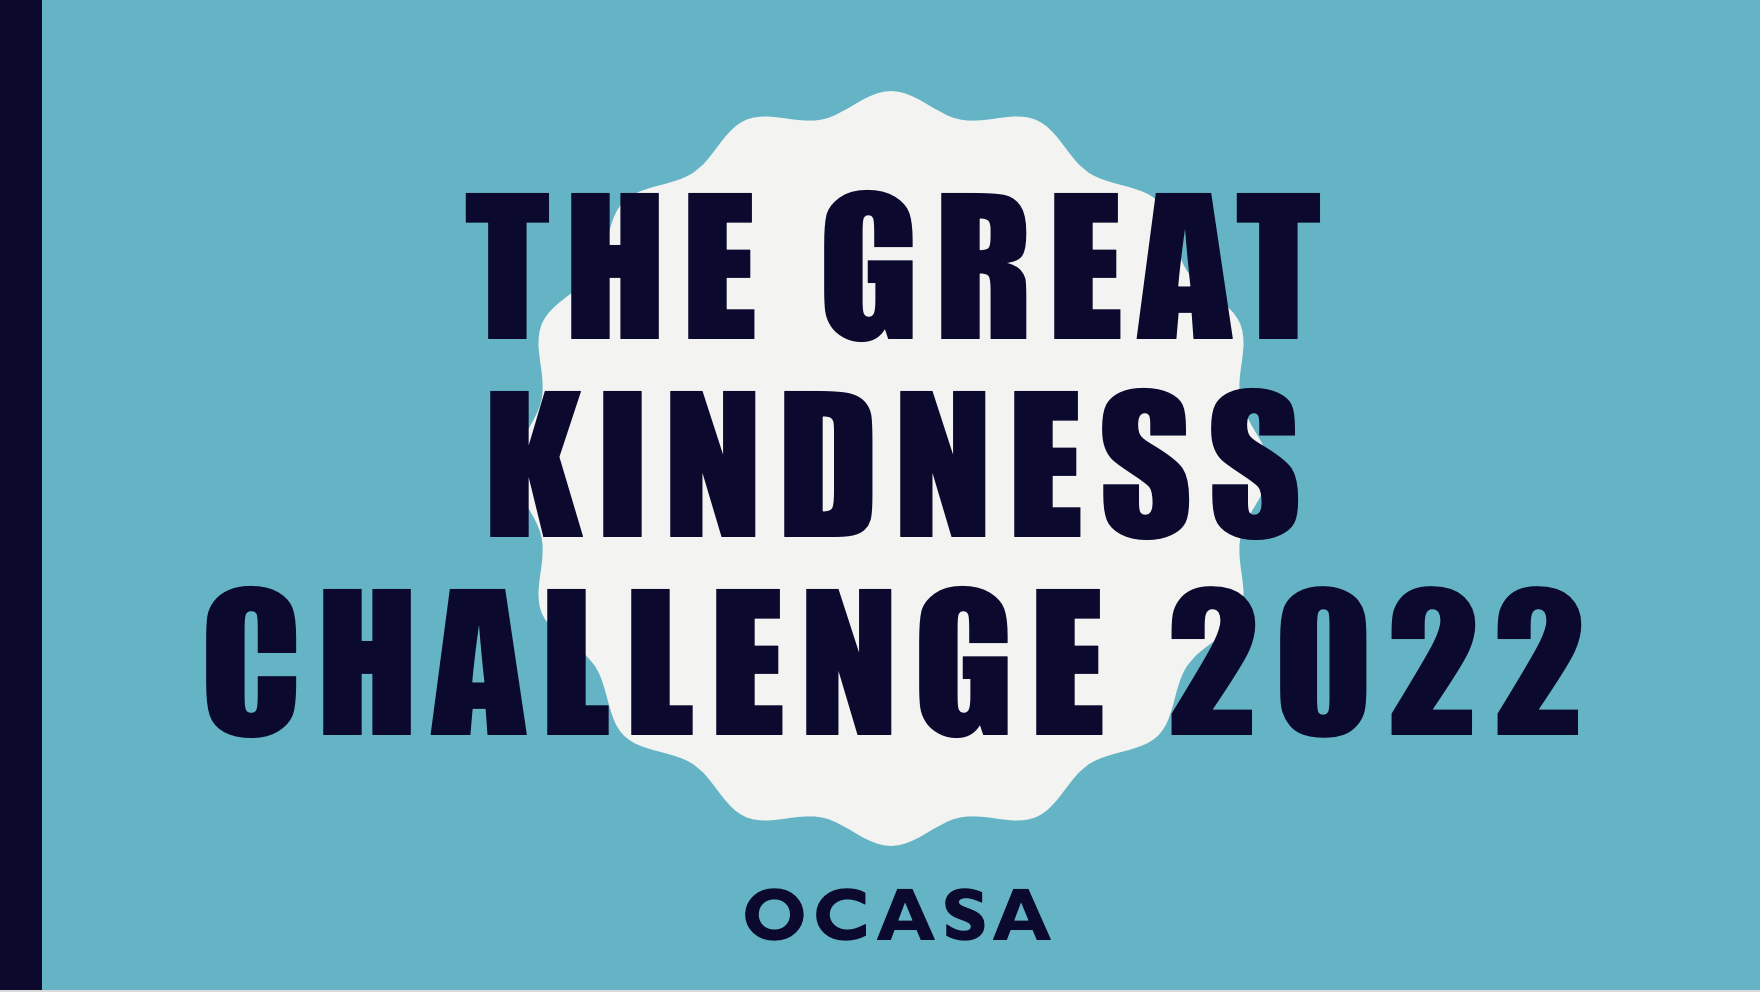 Support OCASA during the Future is Working Giving Day